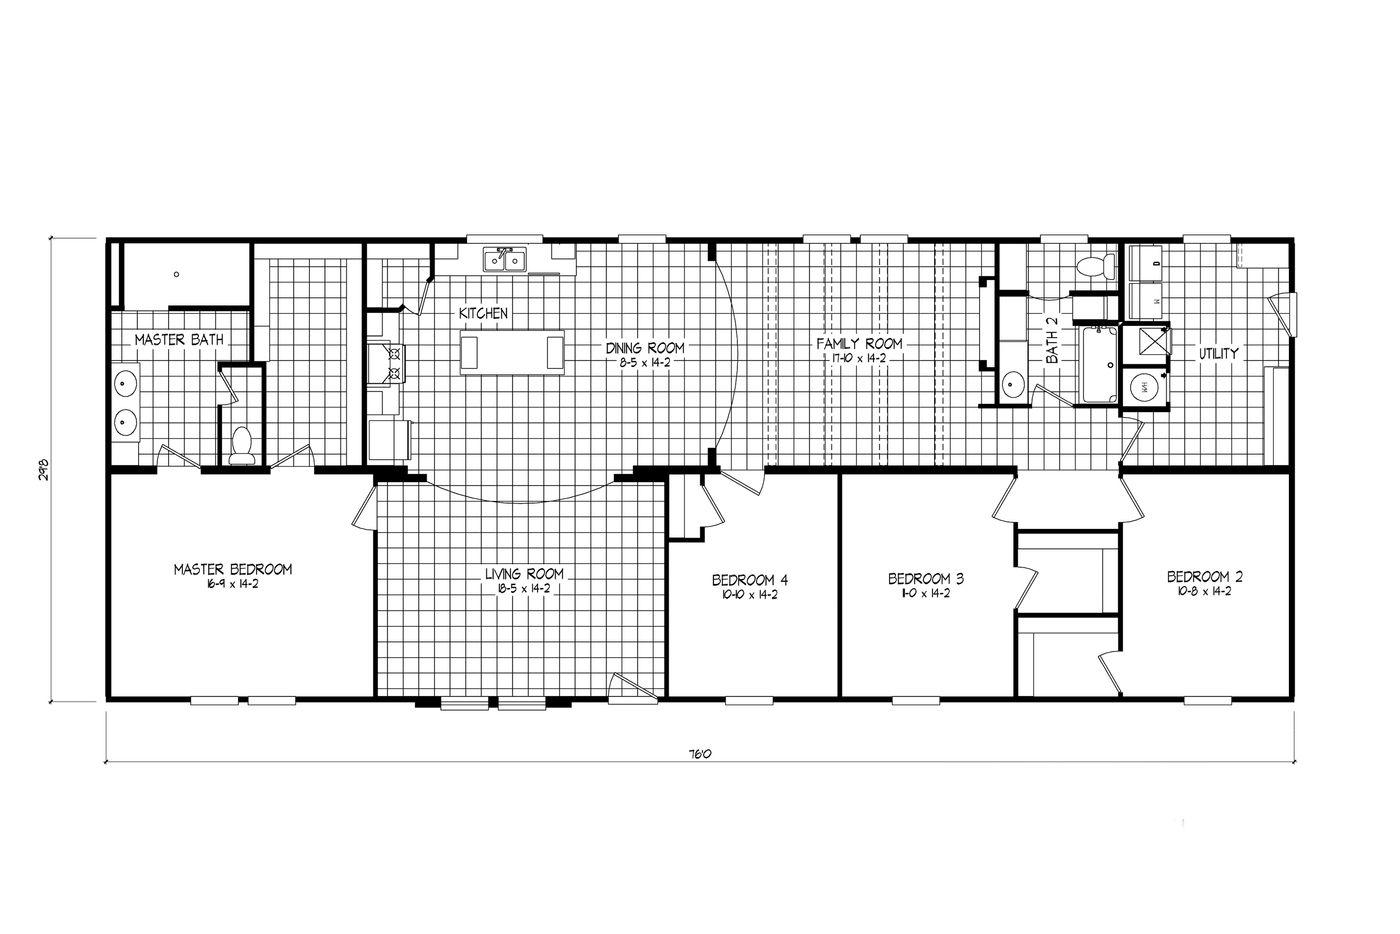 The 1444 CAROLINA Floor Plan. This Manufactured Mobile Home features 4 bedrooms and 2 baths.